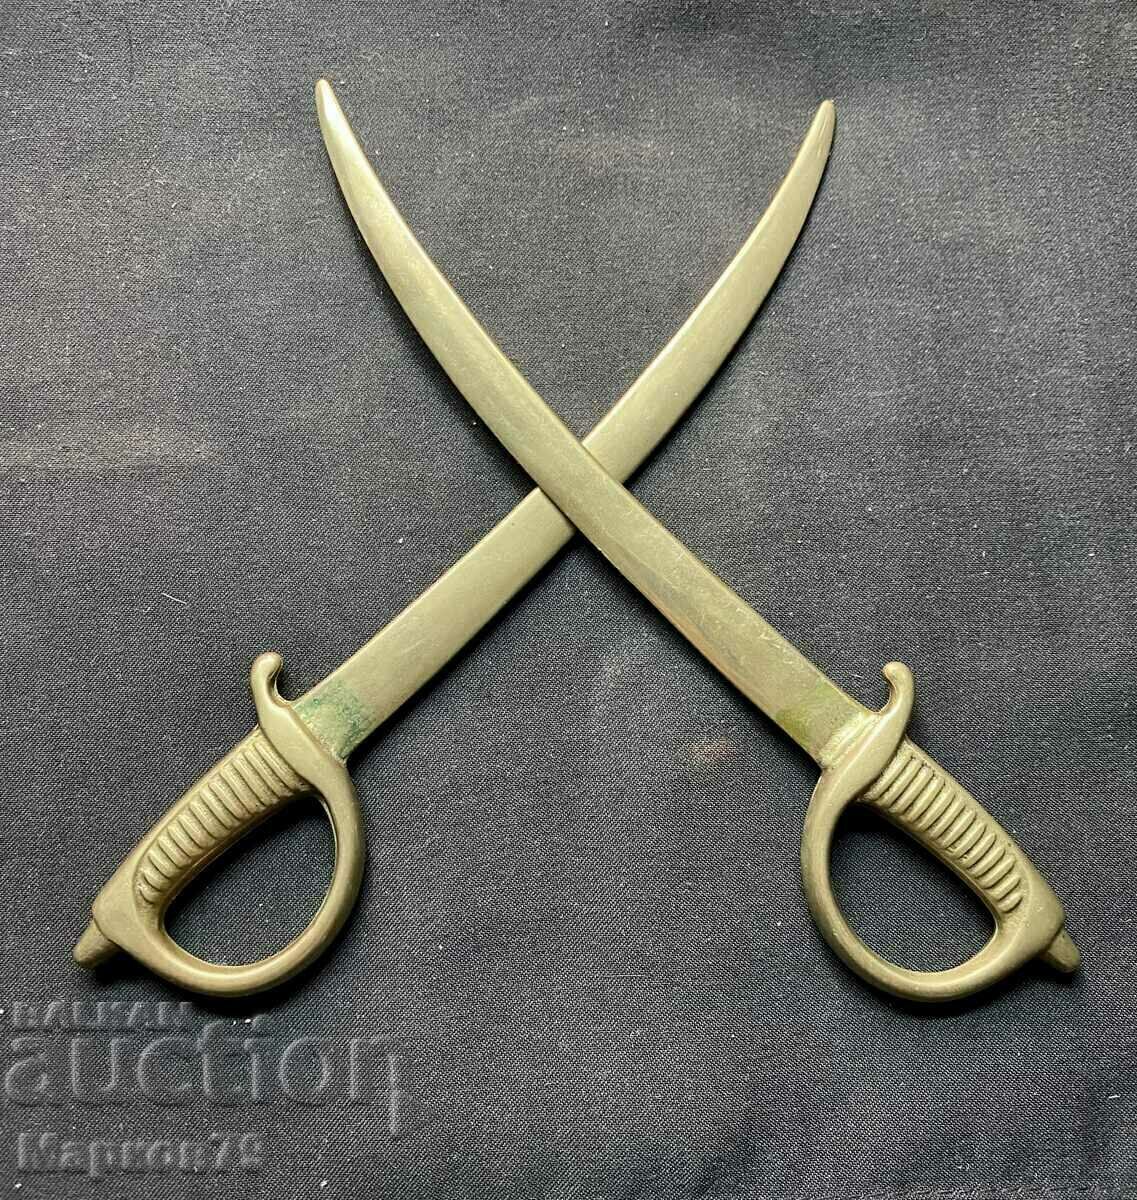 Two bronze letter knives